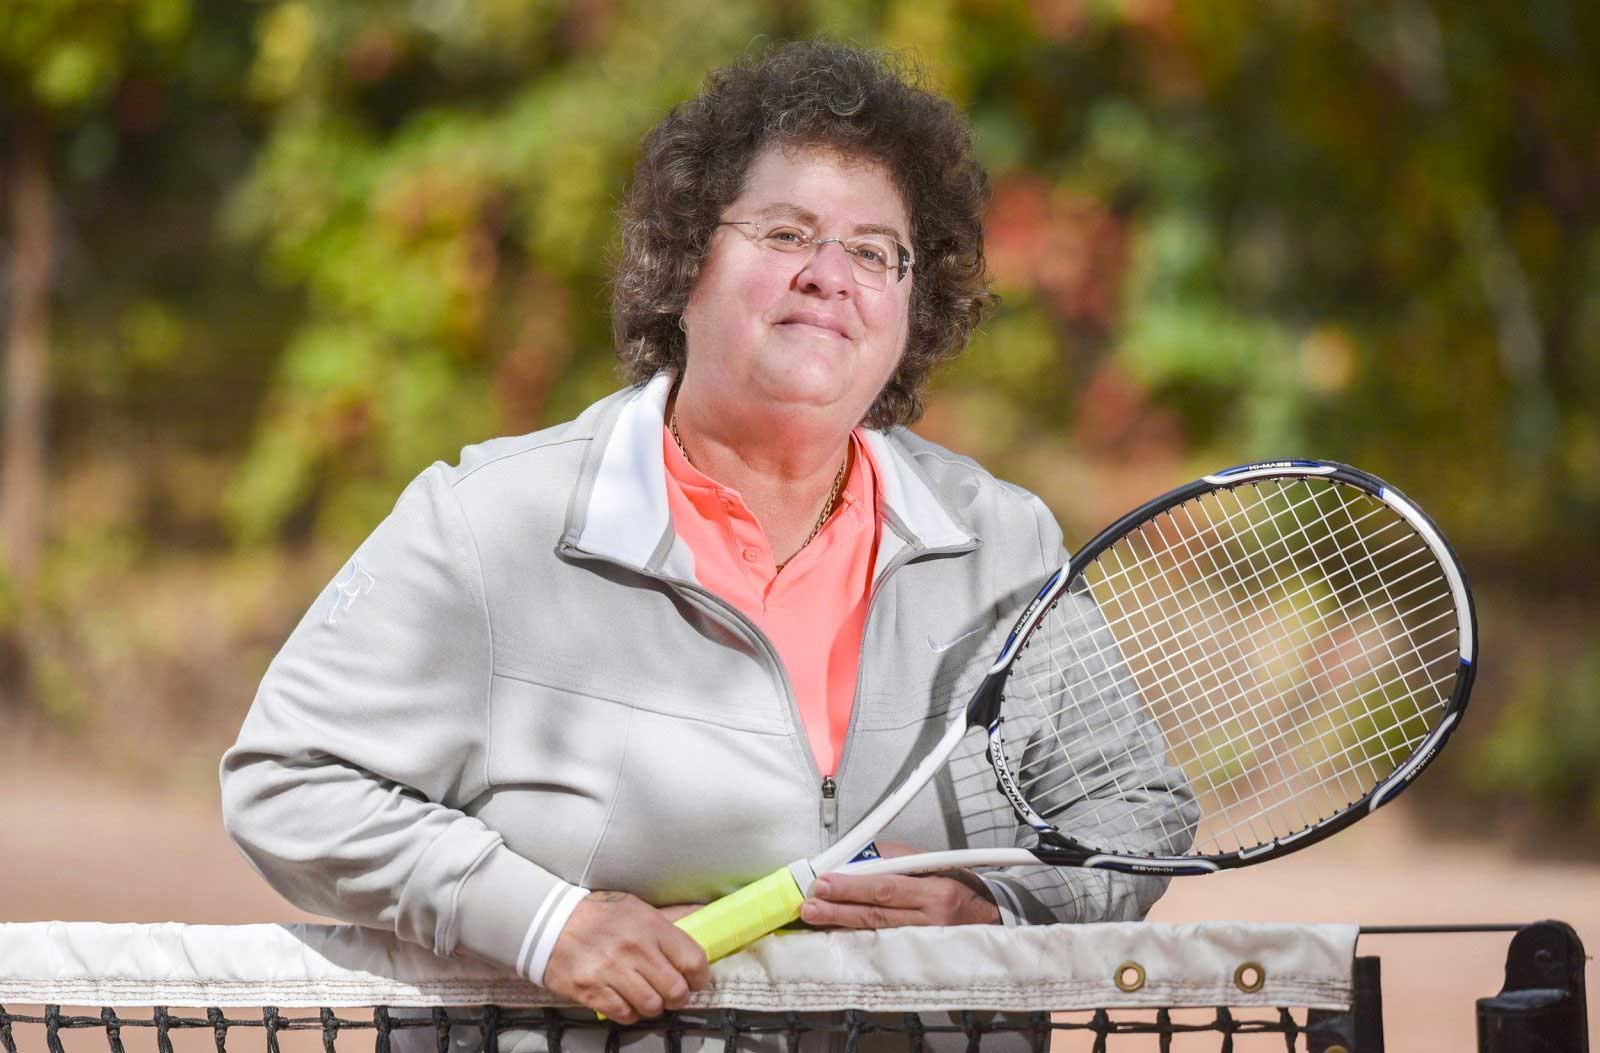 Abbe Seldin is posed with a tennis racket